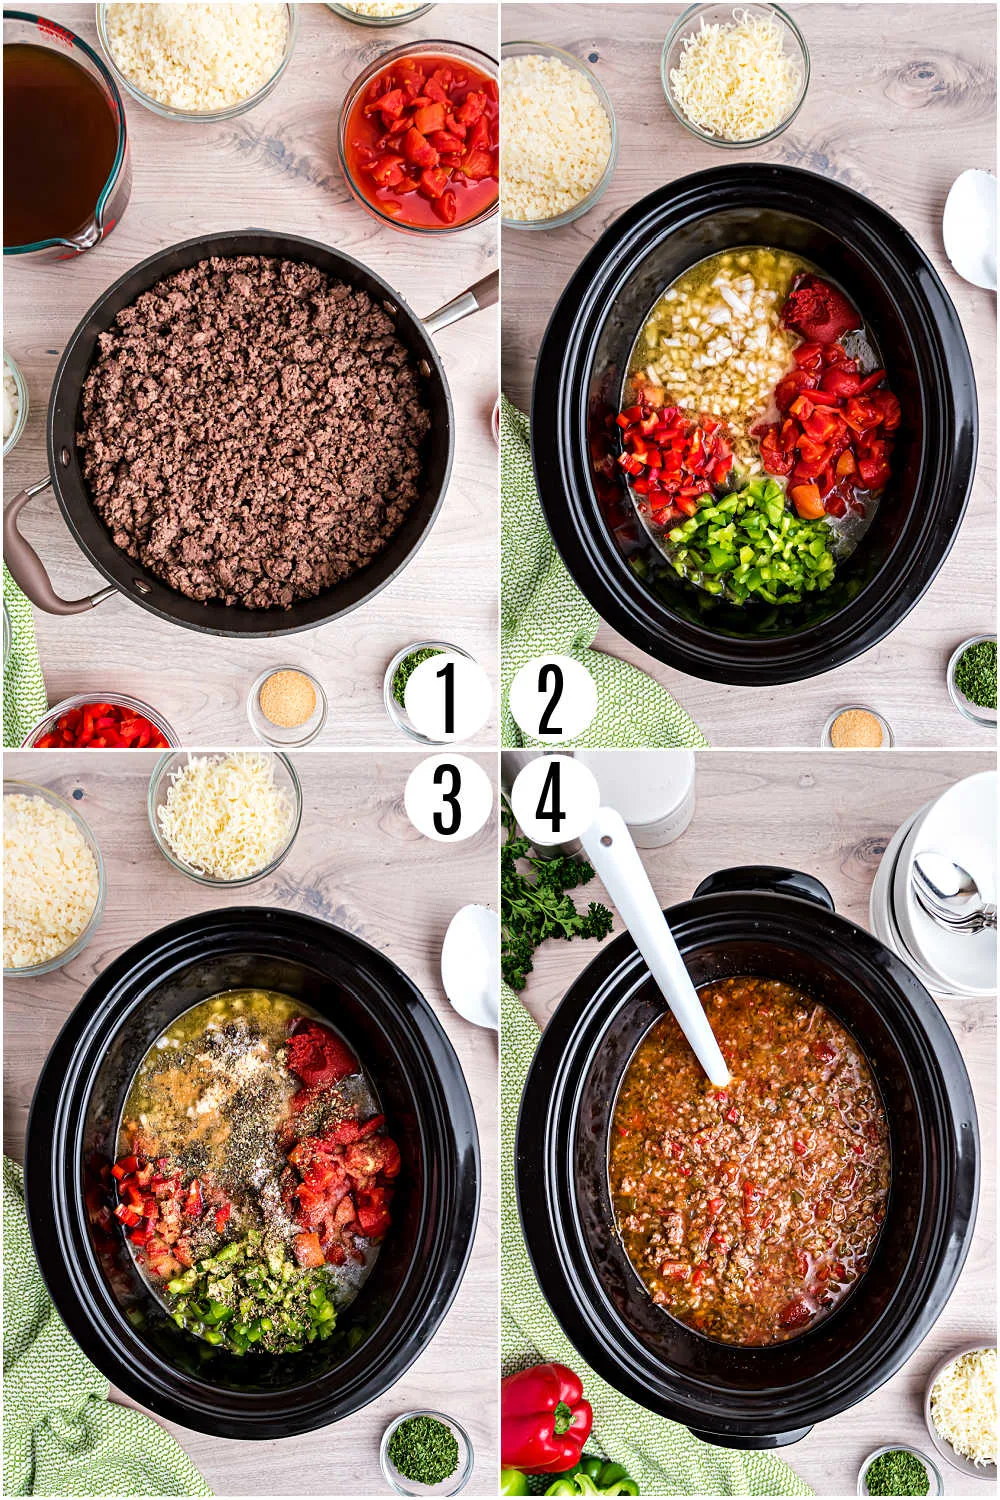 Step by step photos to make stuffed pepper soup.